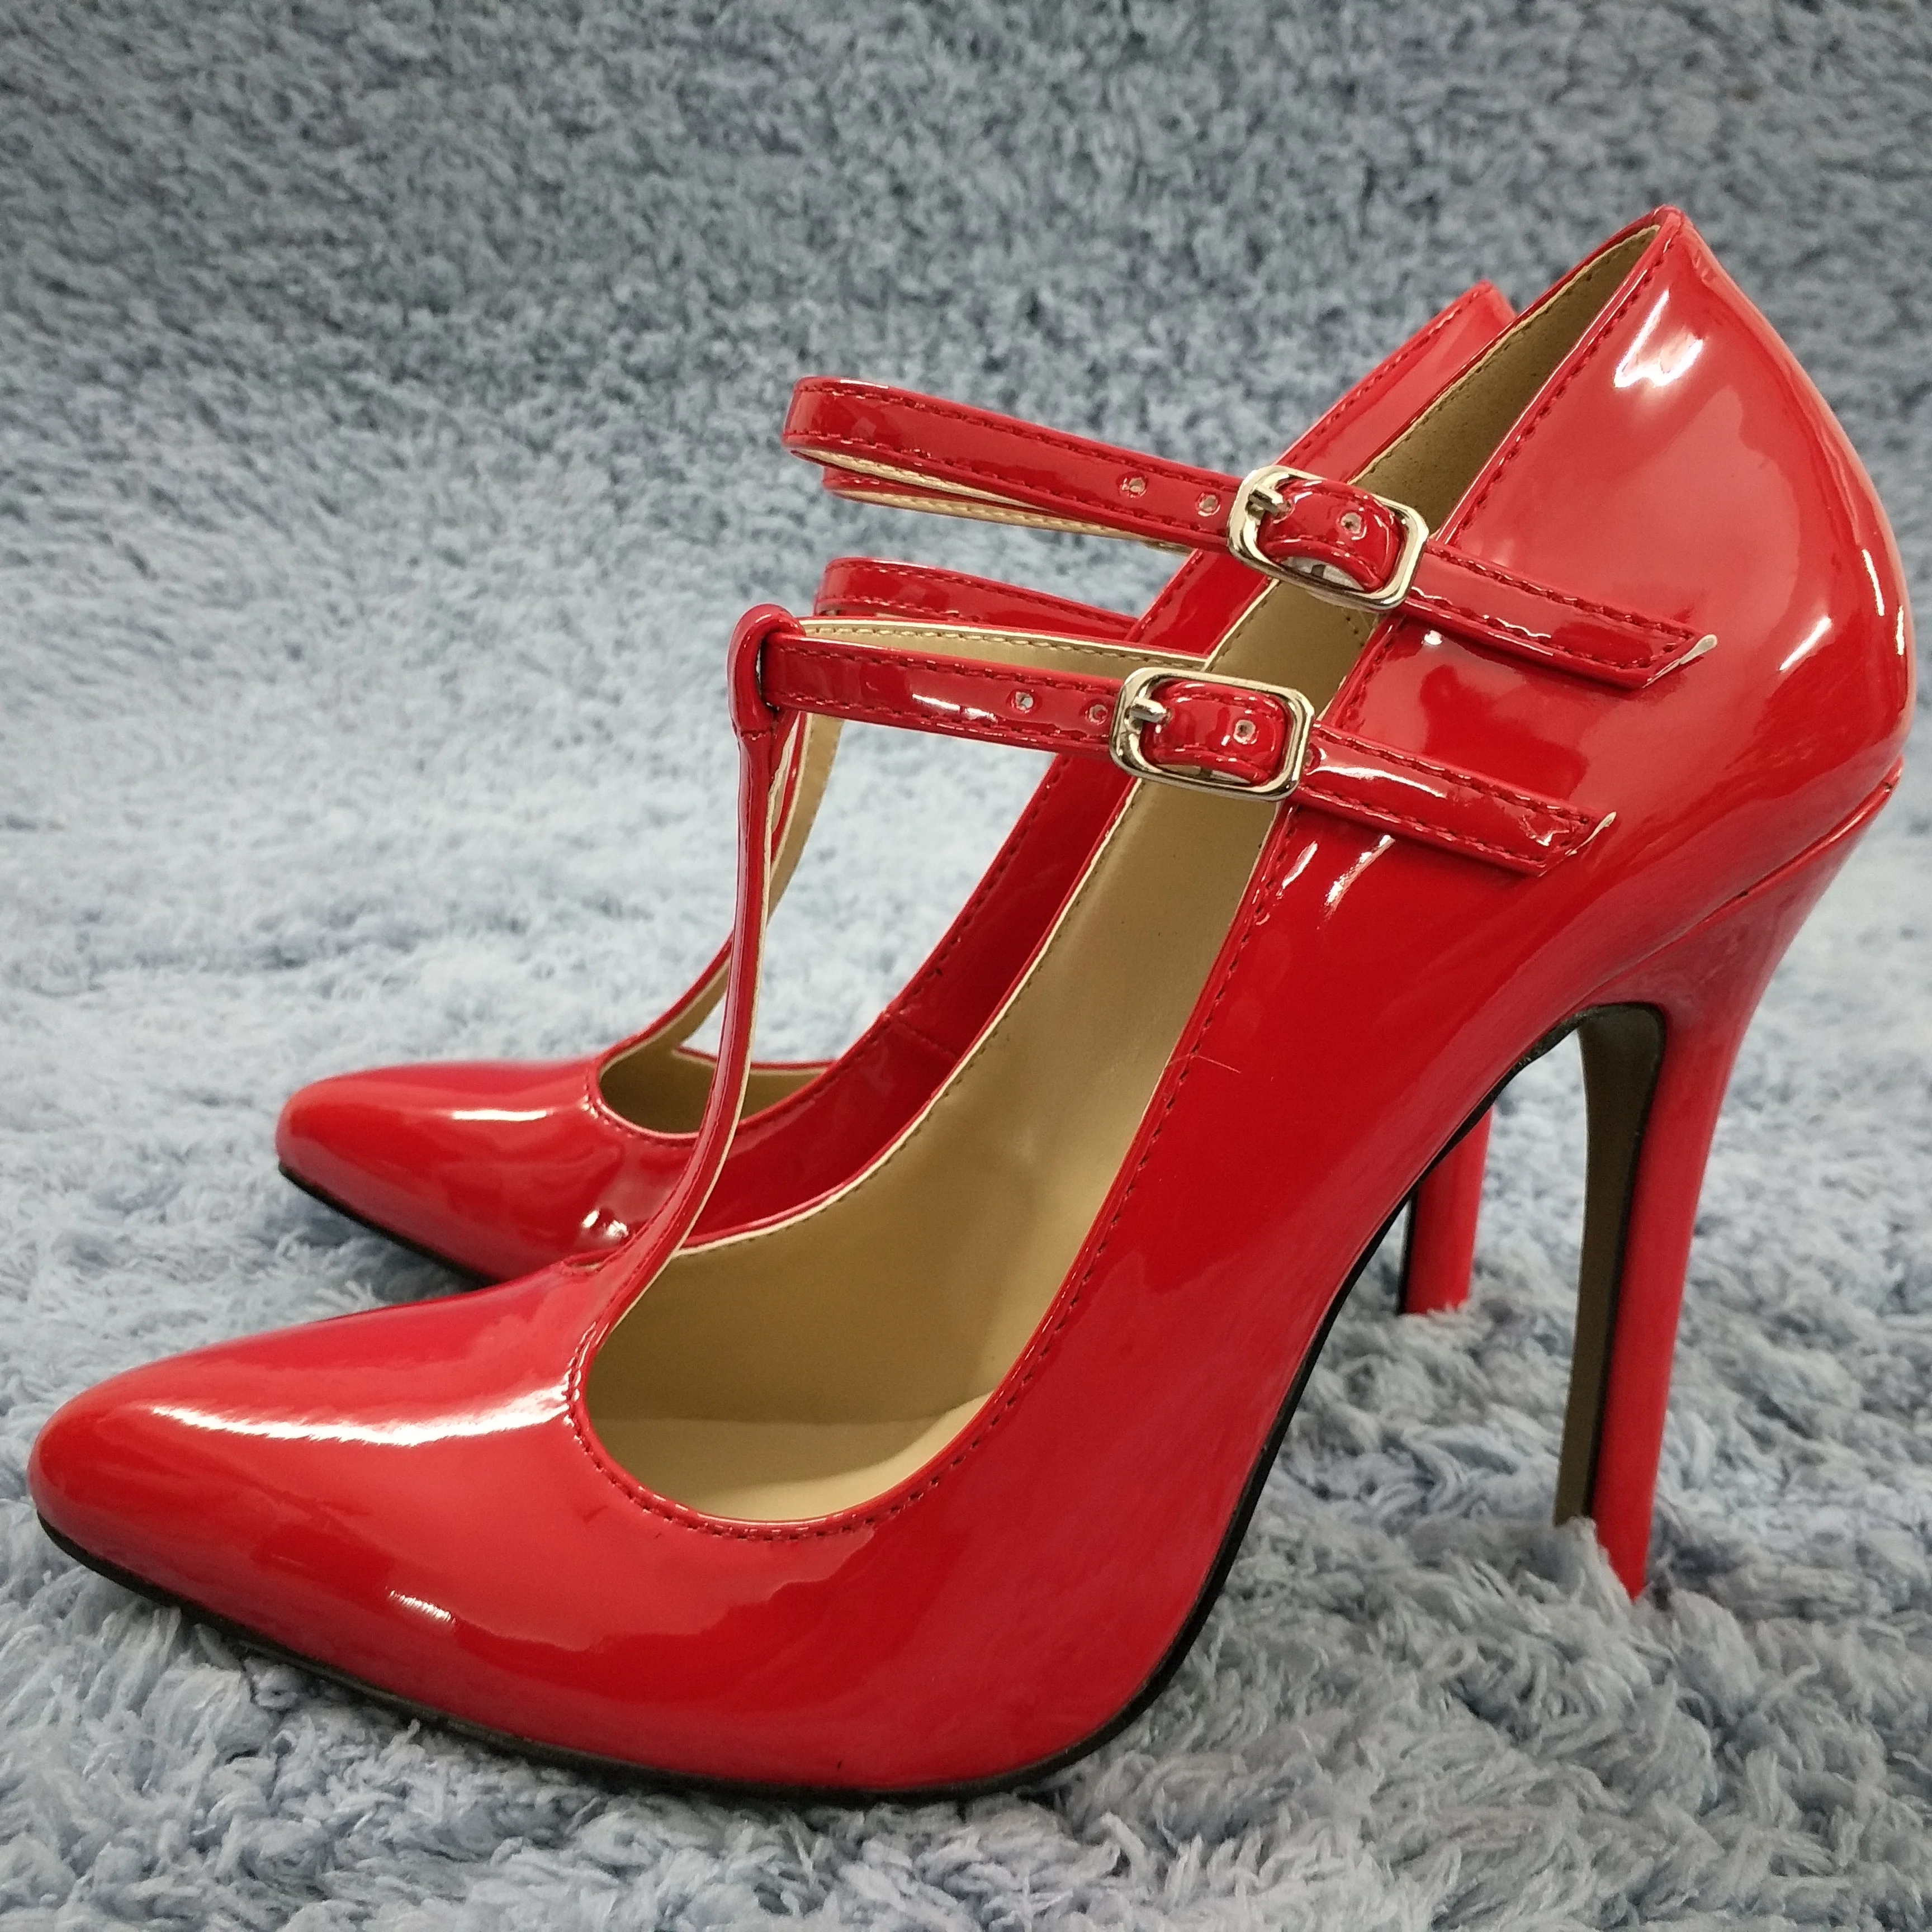 

Women Stiletto Thin High Heel Pumps Sexy Pointed Toe T-Strap Red Patent Party Ball Fashion Lady Shoes 0640-i